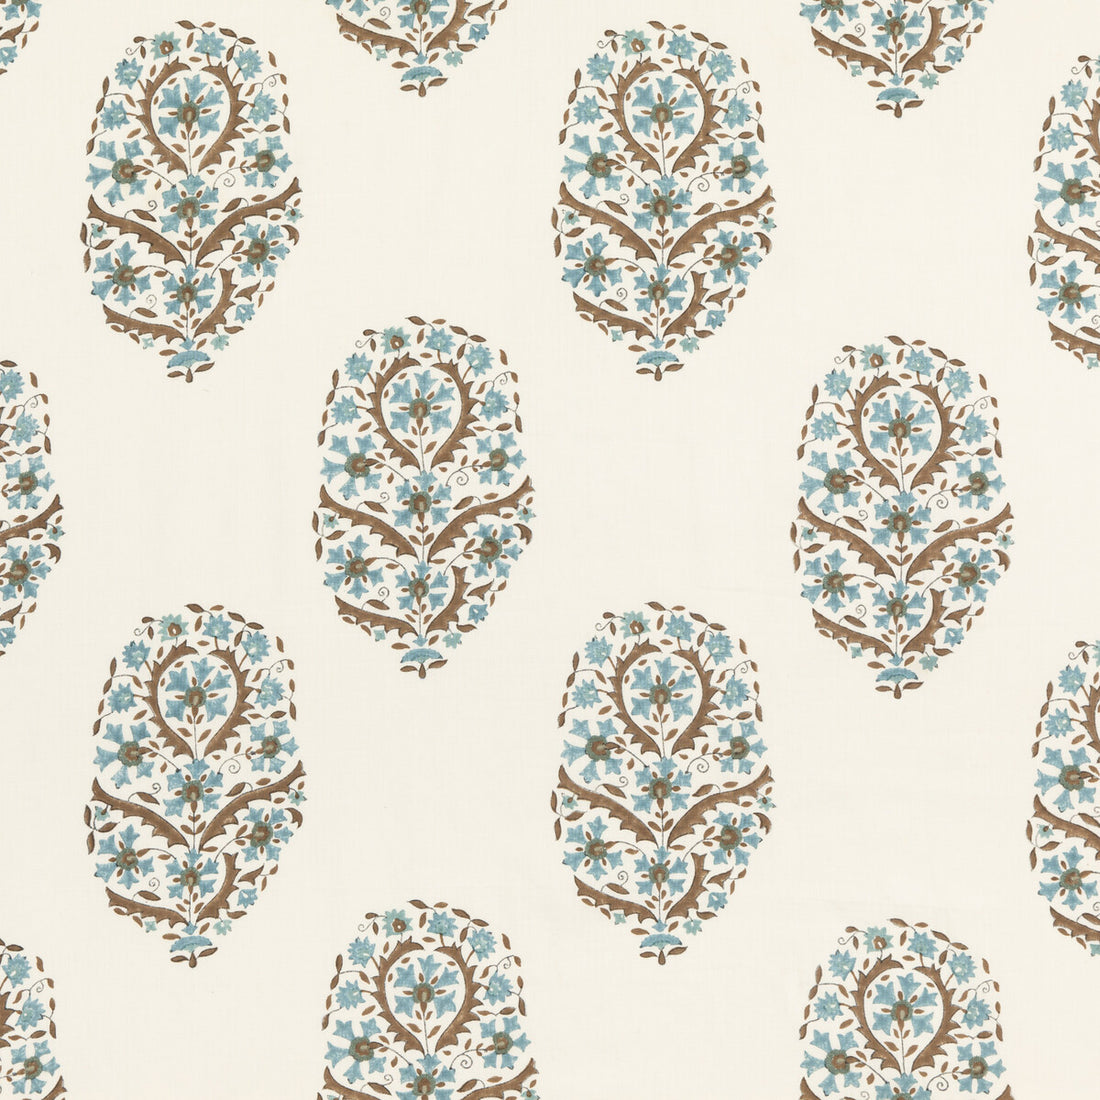 Aydon fabric in teal color - pattern BP10795.1.0 - by G P &amp; J Baker in the Artisan II collection